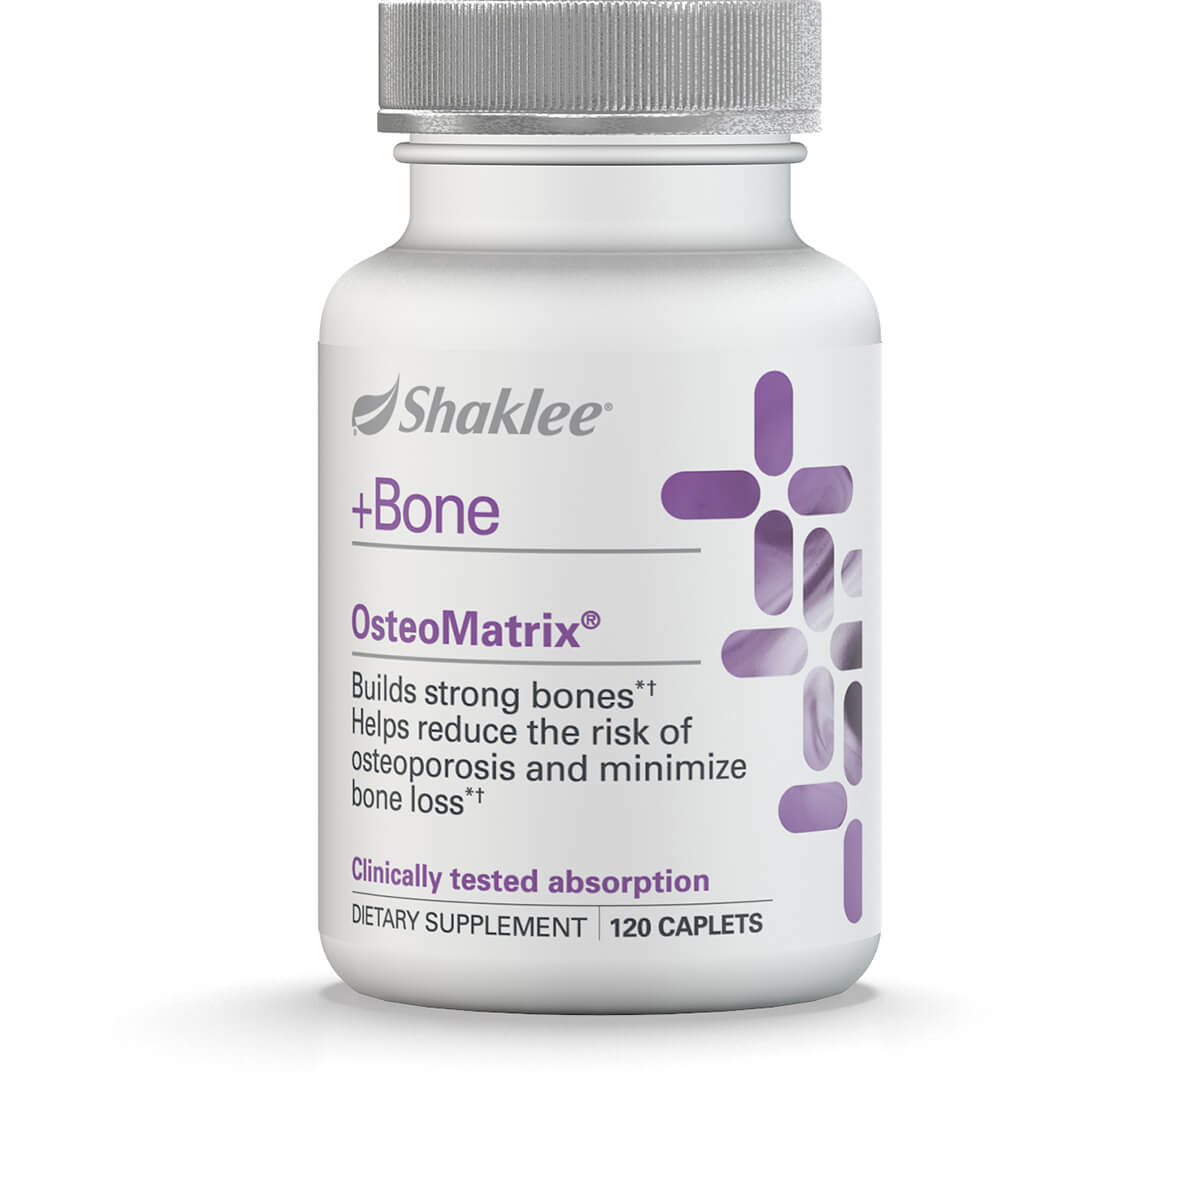 http://images.shaklee.com/products/b21217.jpg